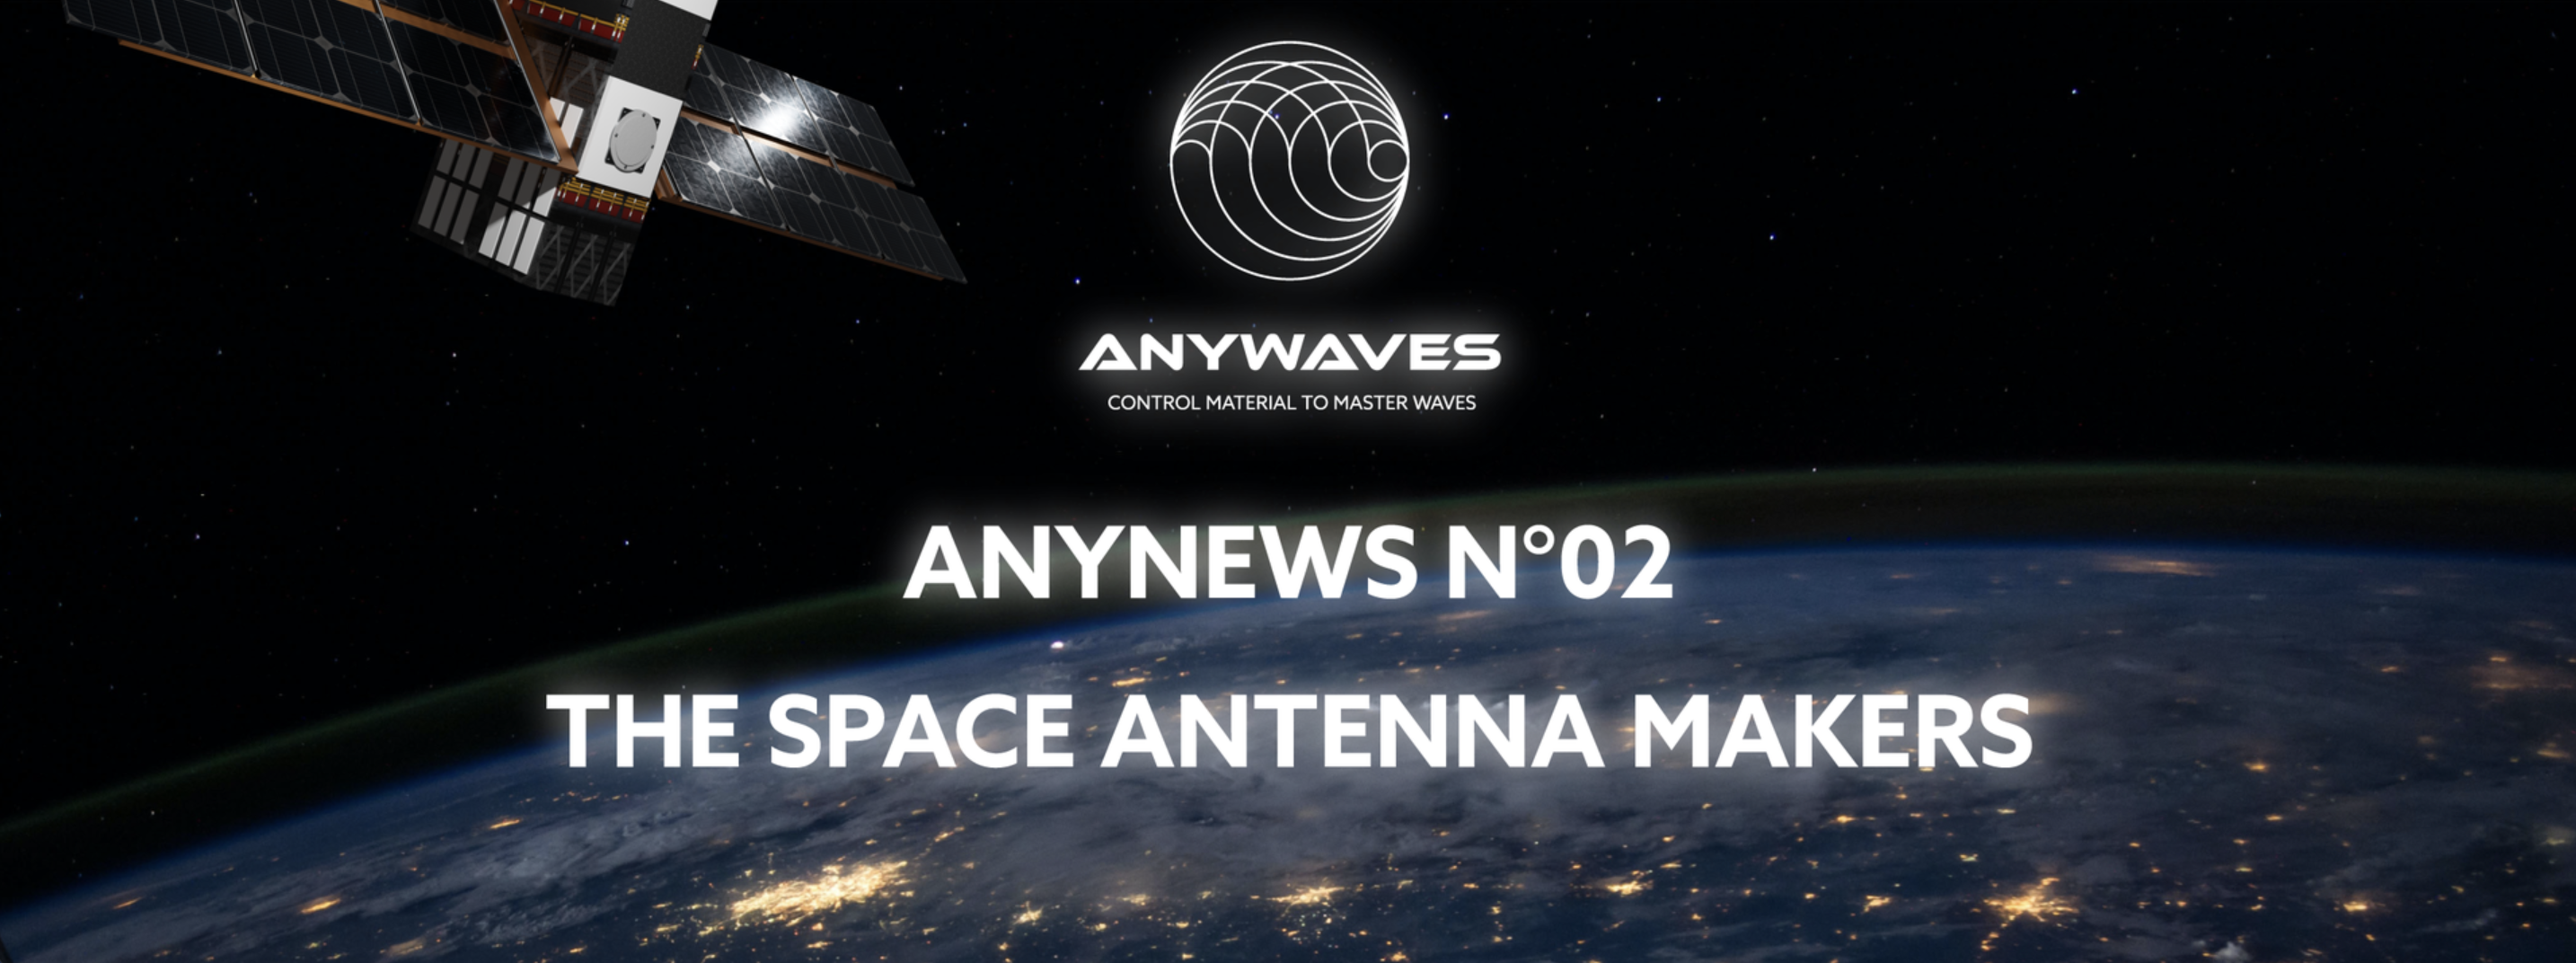 Anynews n°2 - The Space Antenna Makers